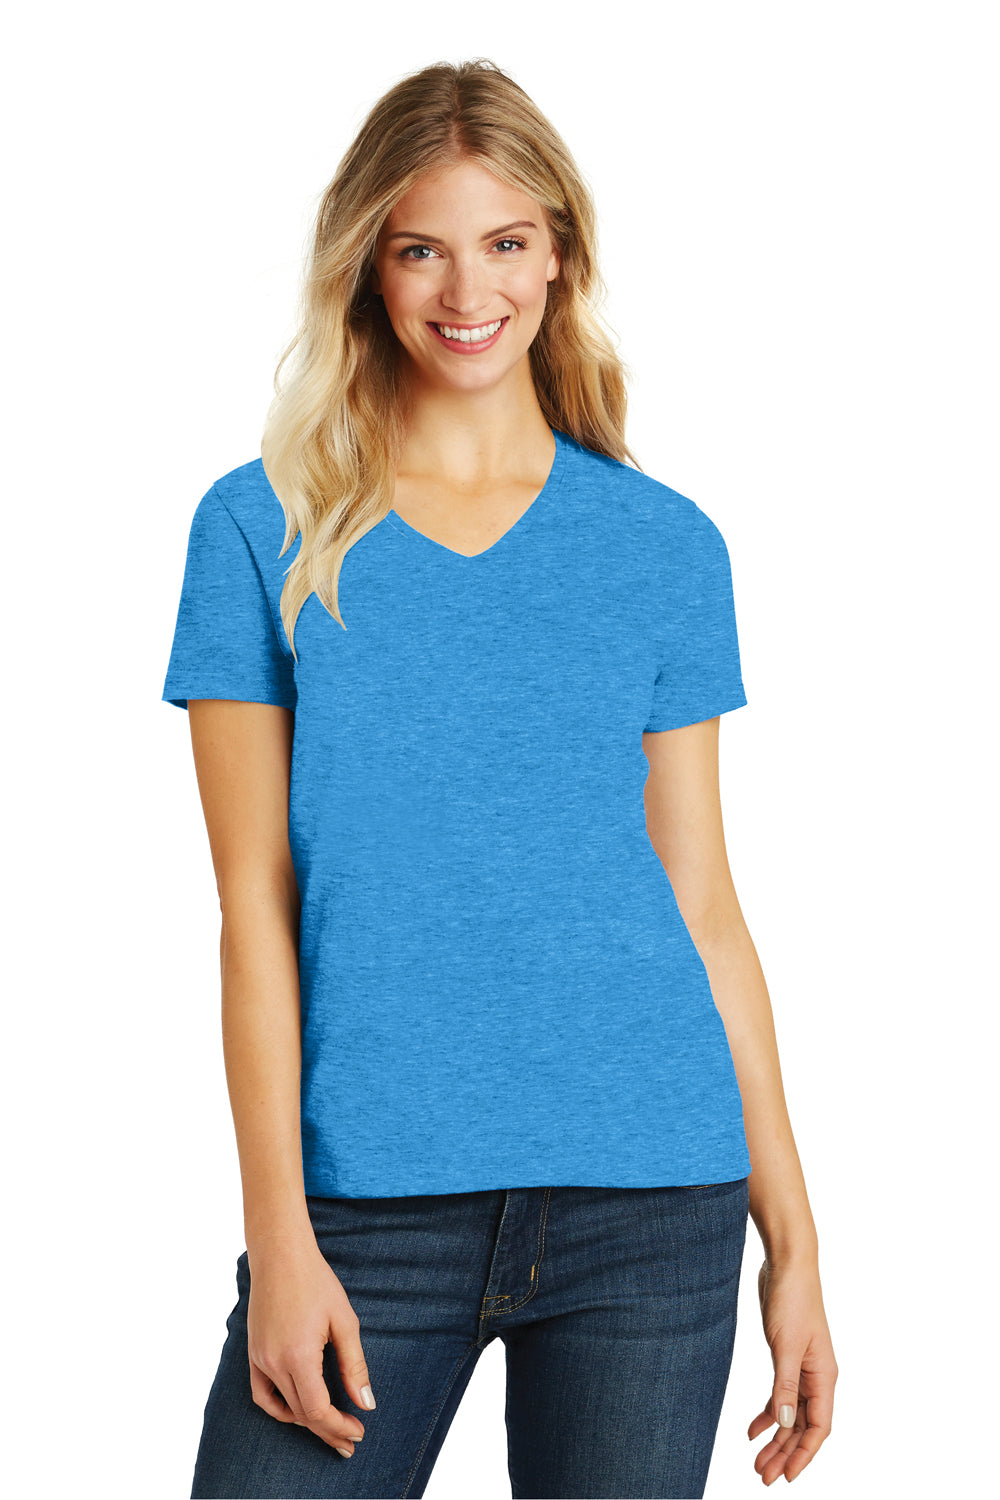 District DM1190L Womens Perfect Blend Short Sleeve V-Neck T-Shirt Heather Turquoise Blue Front